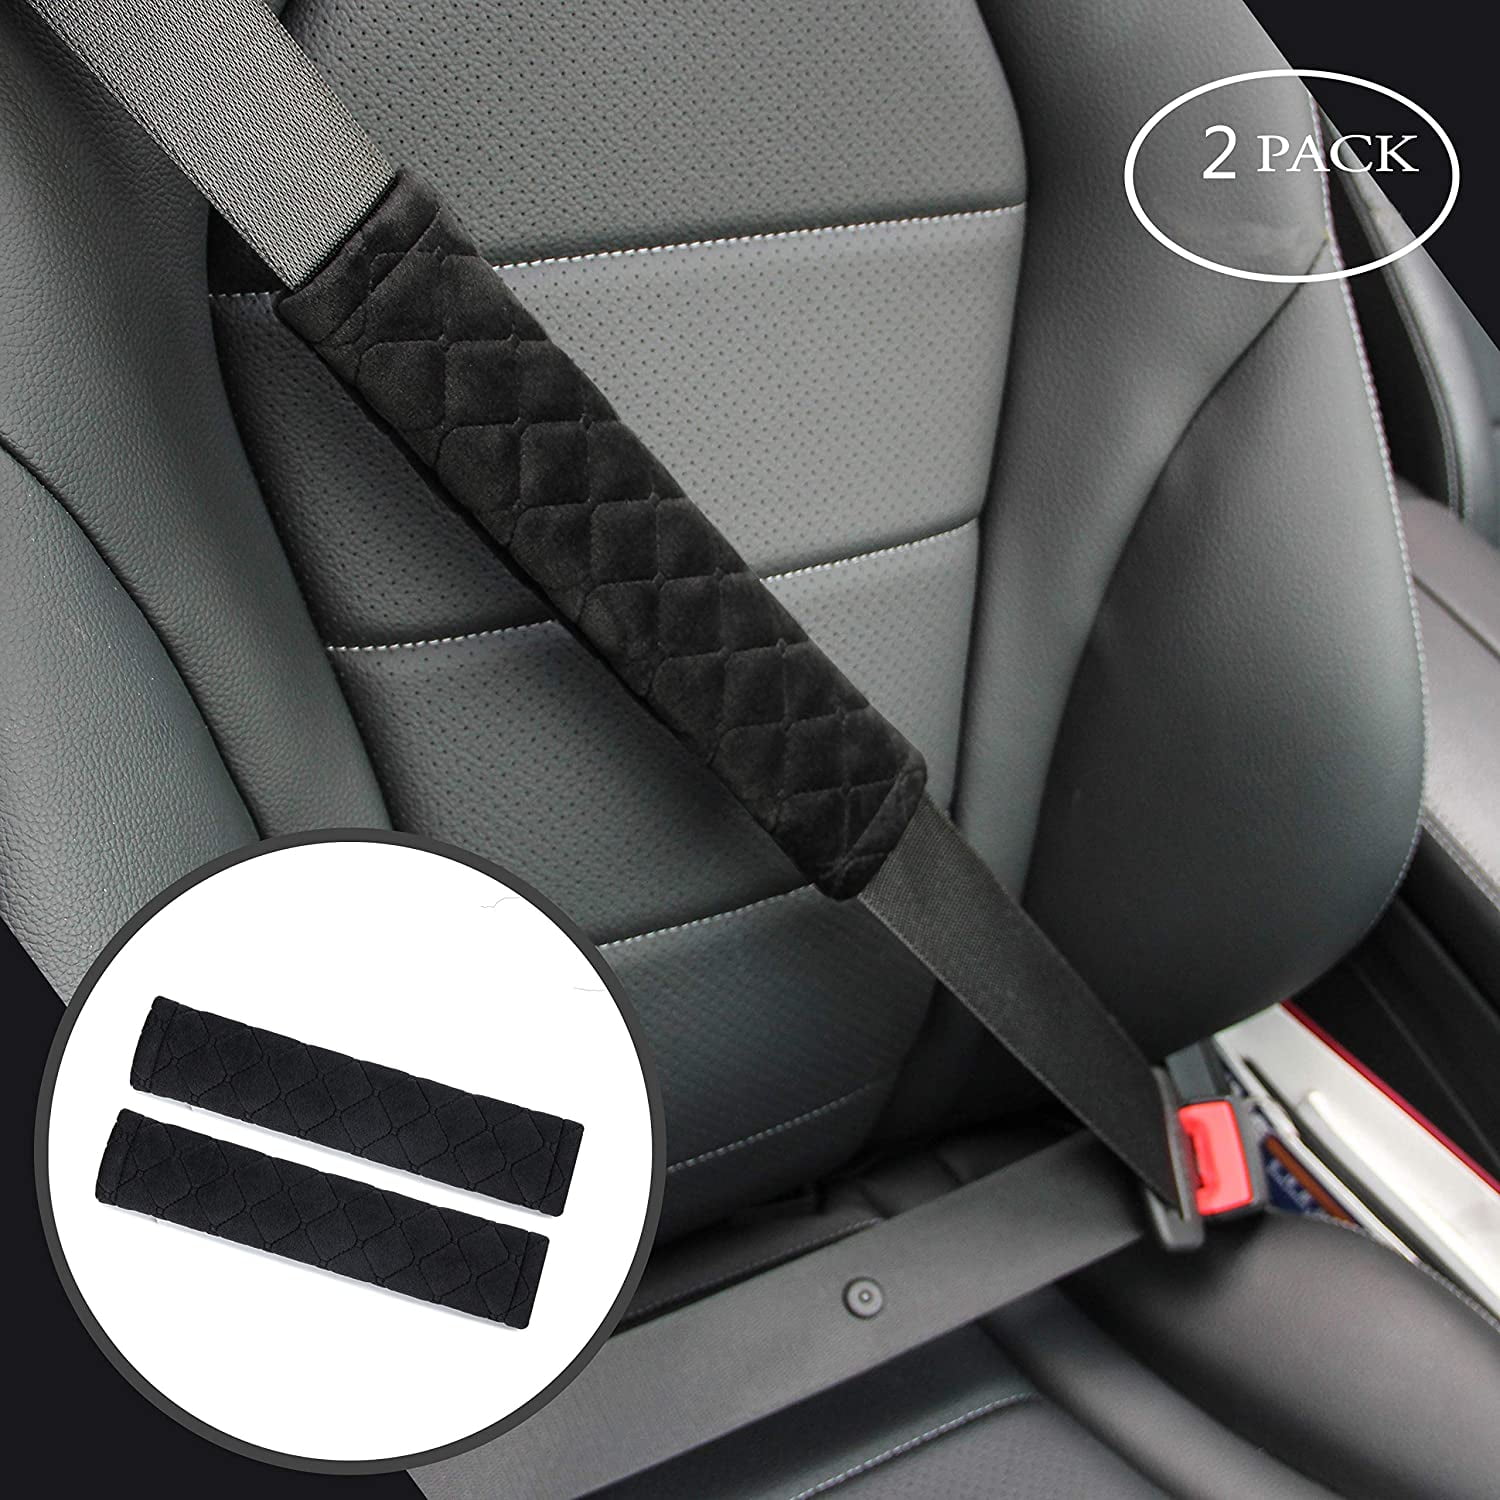 SILENCIO Soft Auto Seat Belt Cover Seat Belt Shoulder Pad Cushions 2 PCS  for a More Comfortable Driving Universal Fit for All Cars - Protect Your  Neck